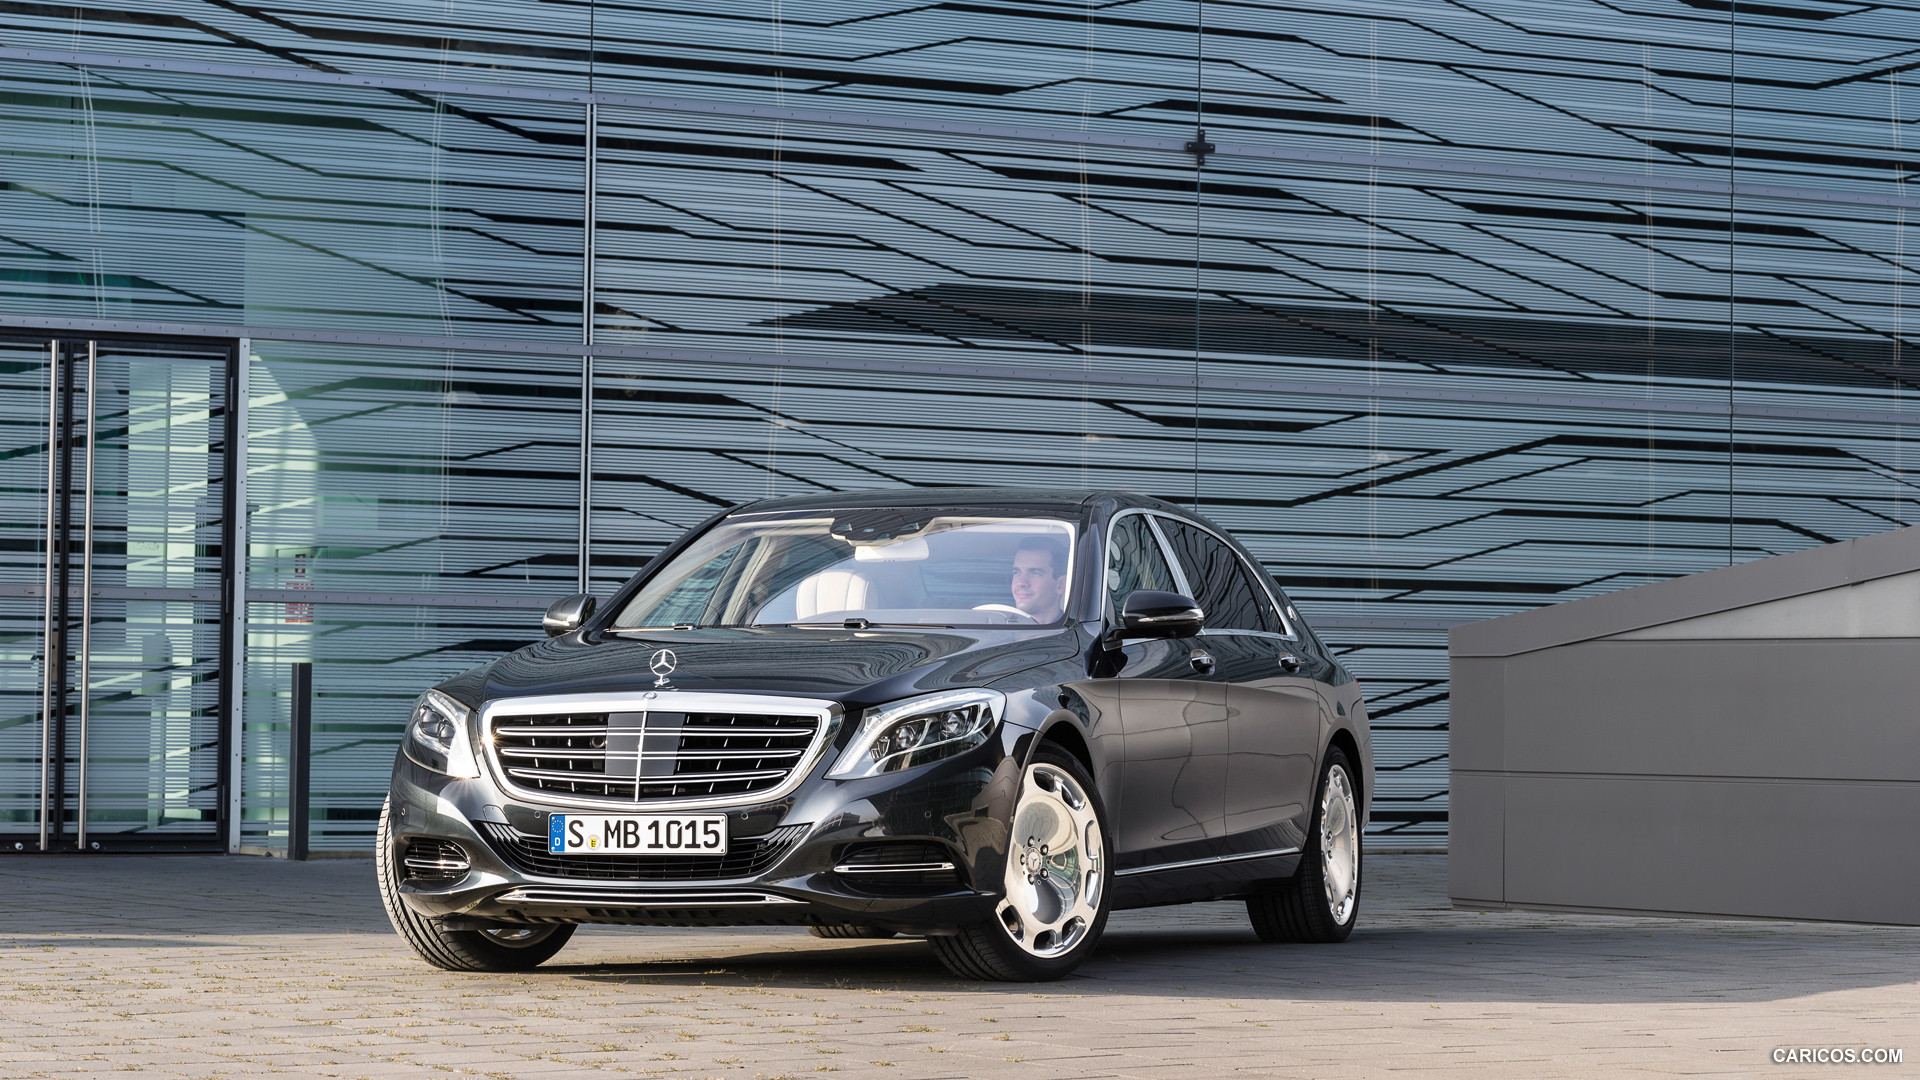 2016 Mercedes-Maybach S-Class S600 - Front, #8 of 225